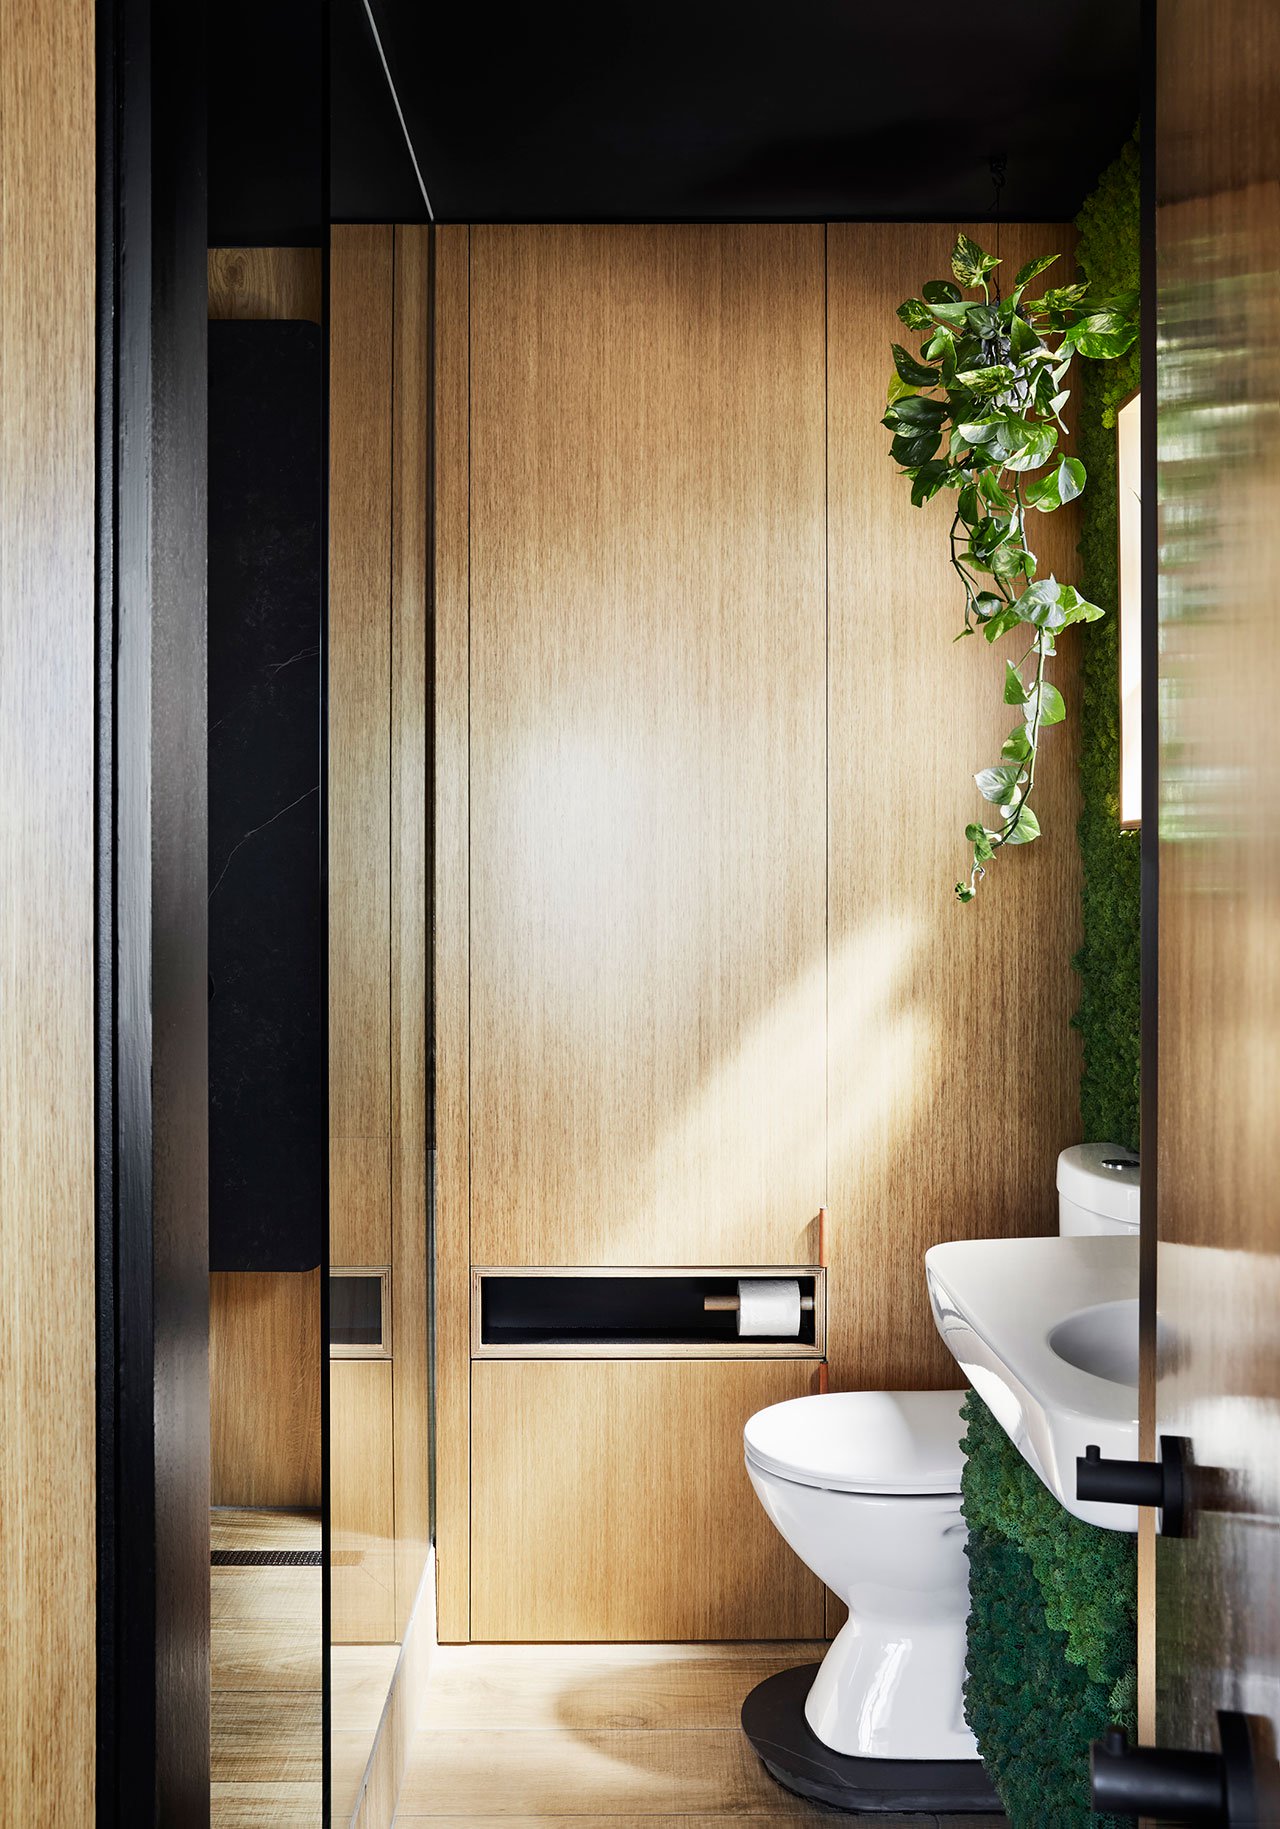 The bathroom features a shower and much light colored wood and black surfaces to continue the color scheme of the apartment